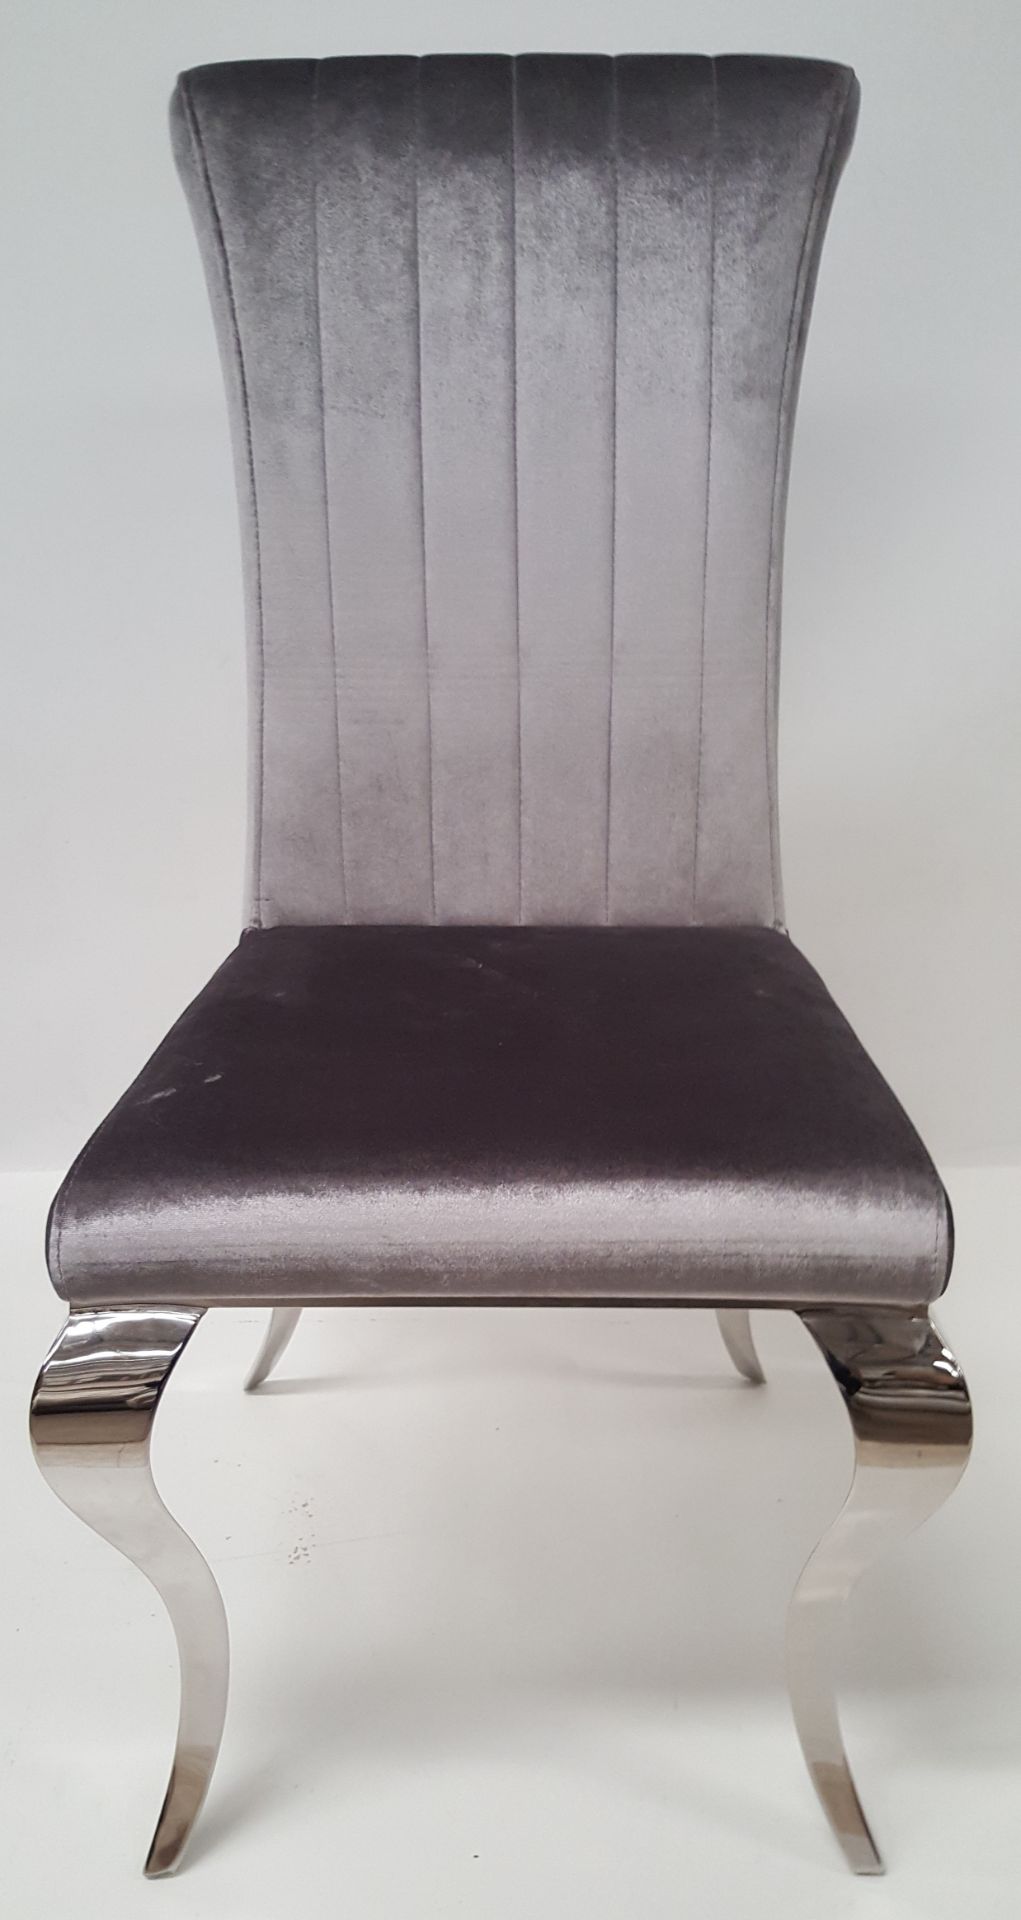 4 x STYLISH SILVER PLUSH VELOUR DRESSING/DINING TABLE CHAIRS - CL408 - Location: Altrincham WA14 - Image 5 of 7